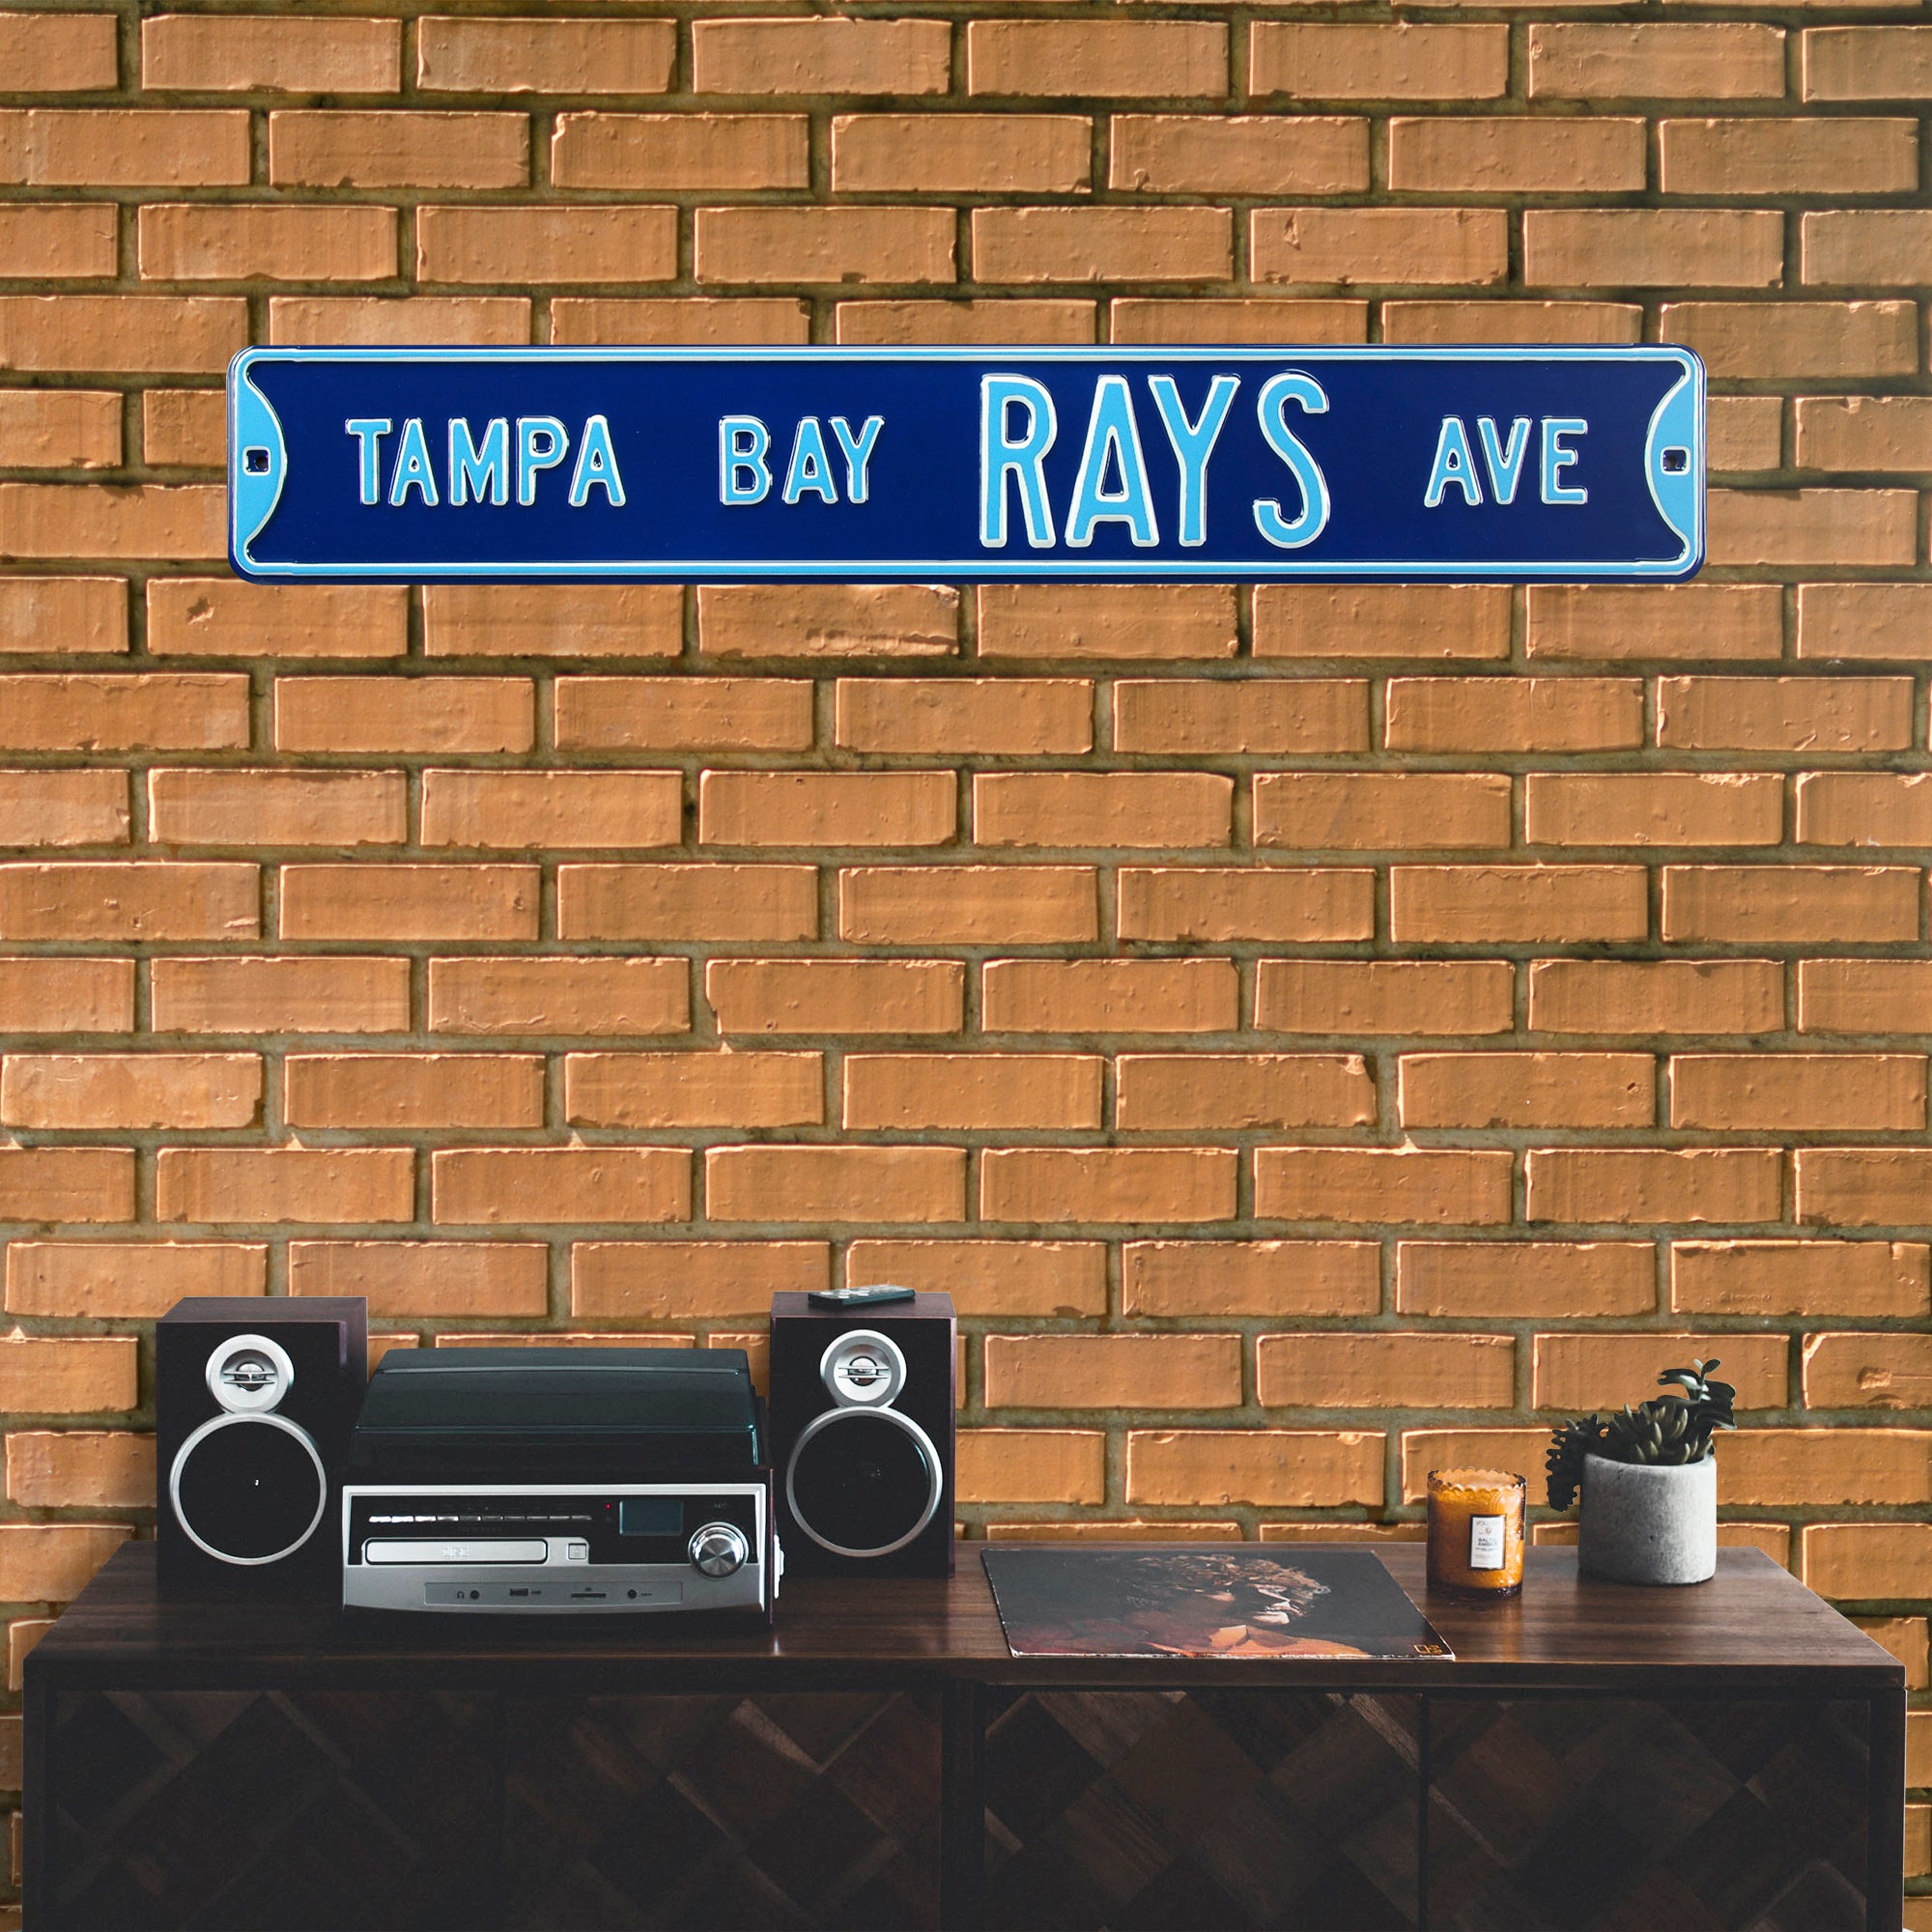 Tampa Bay Rays Steel Street Sign-TAMPA BAY RAYS AVE 36" W x 6" H by Fathead